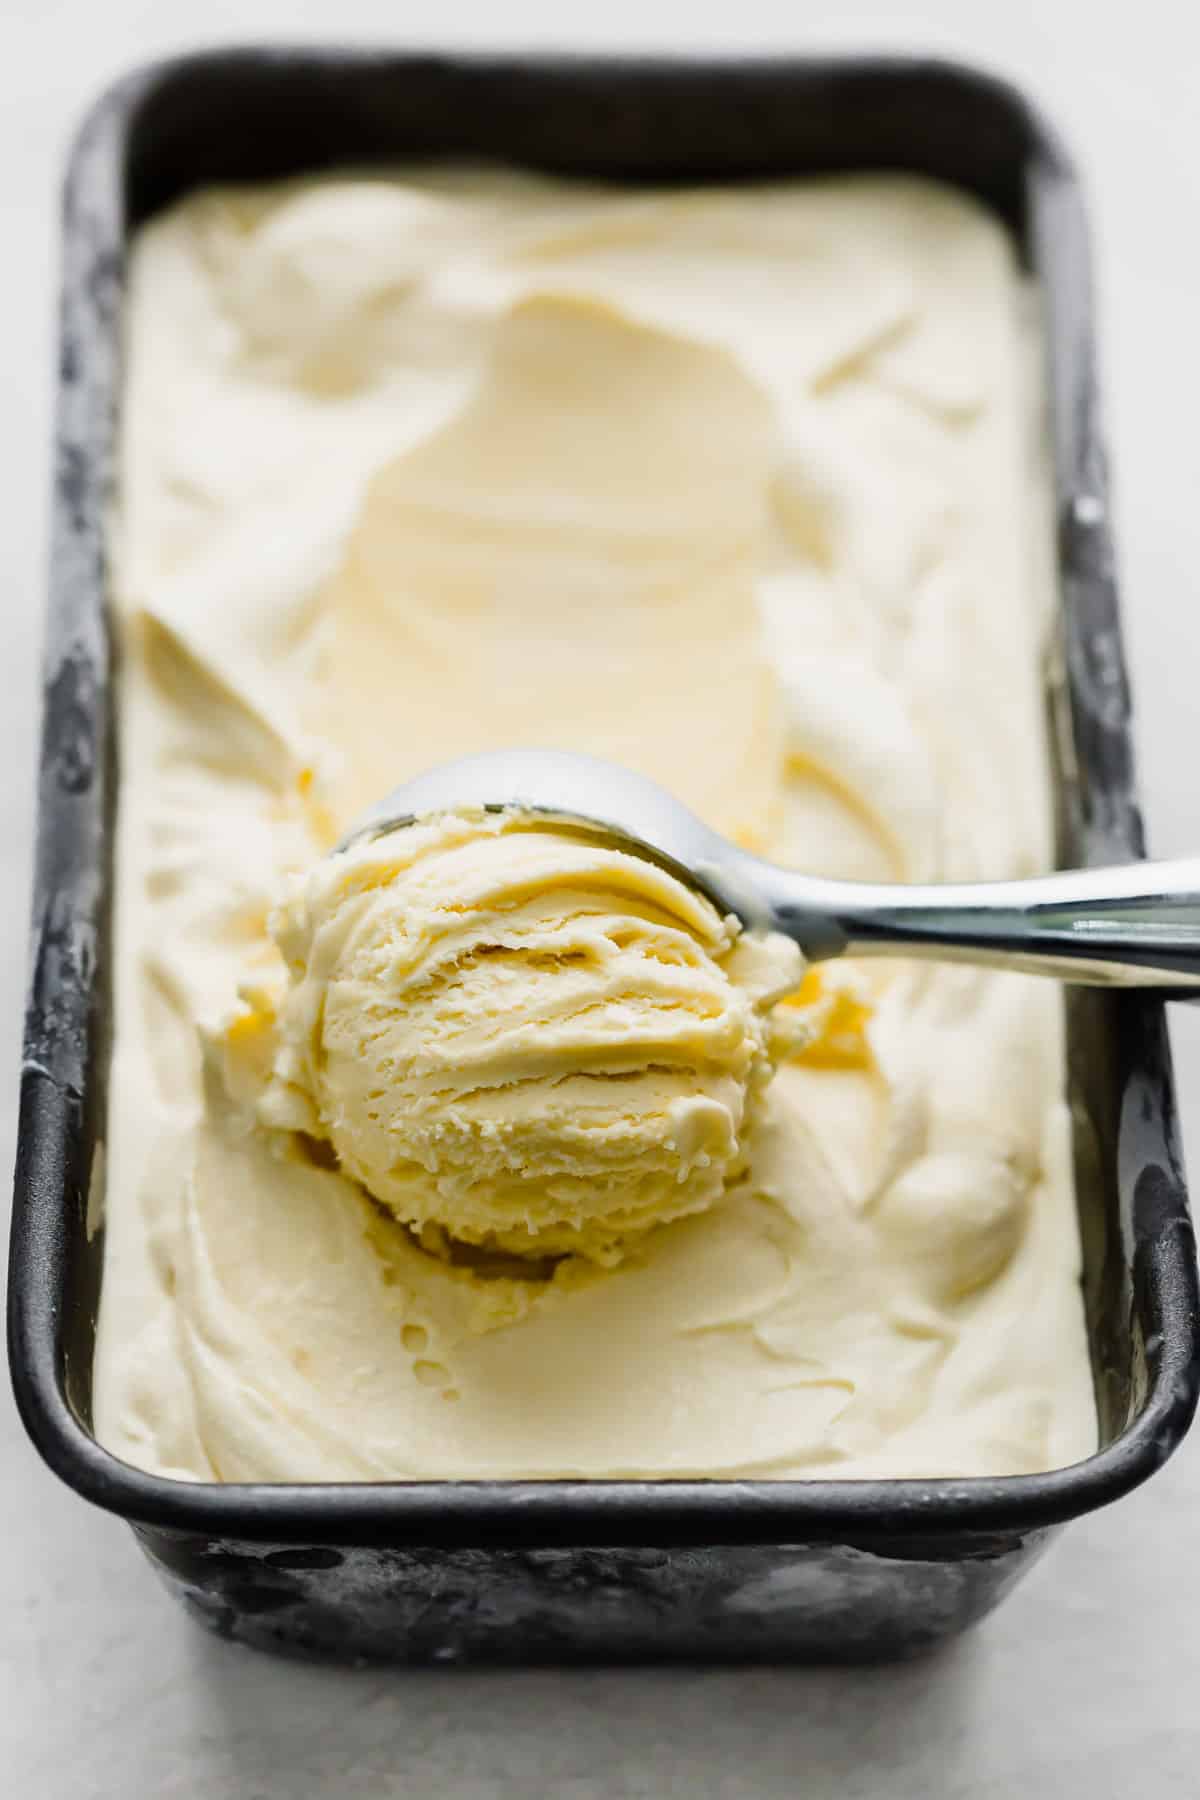 Homemade Vanilla Ice Cream in a bread pan with an ice cream scooping spooning out a portion.